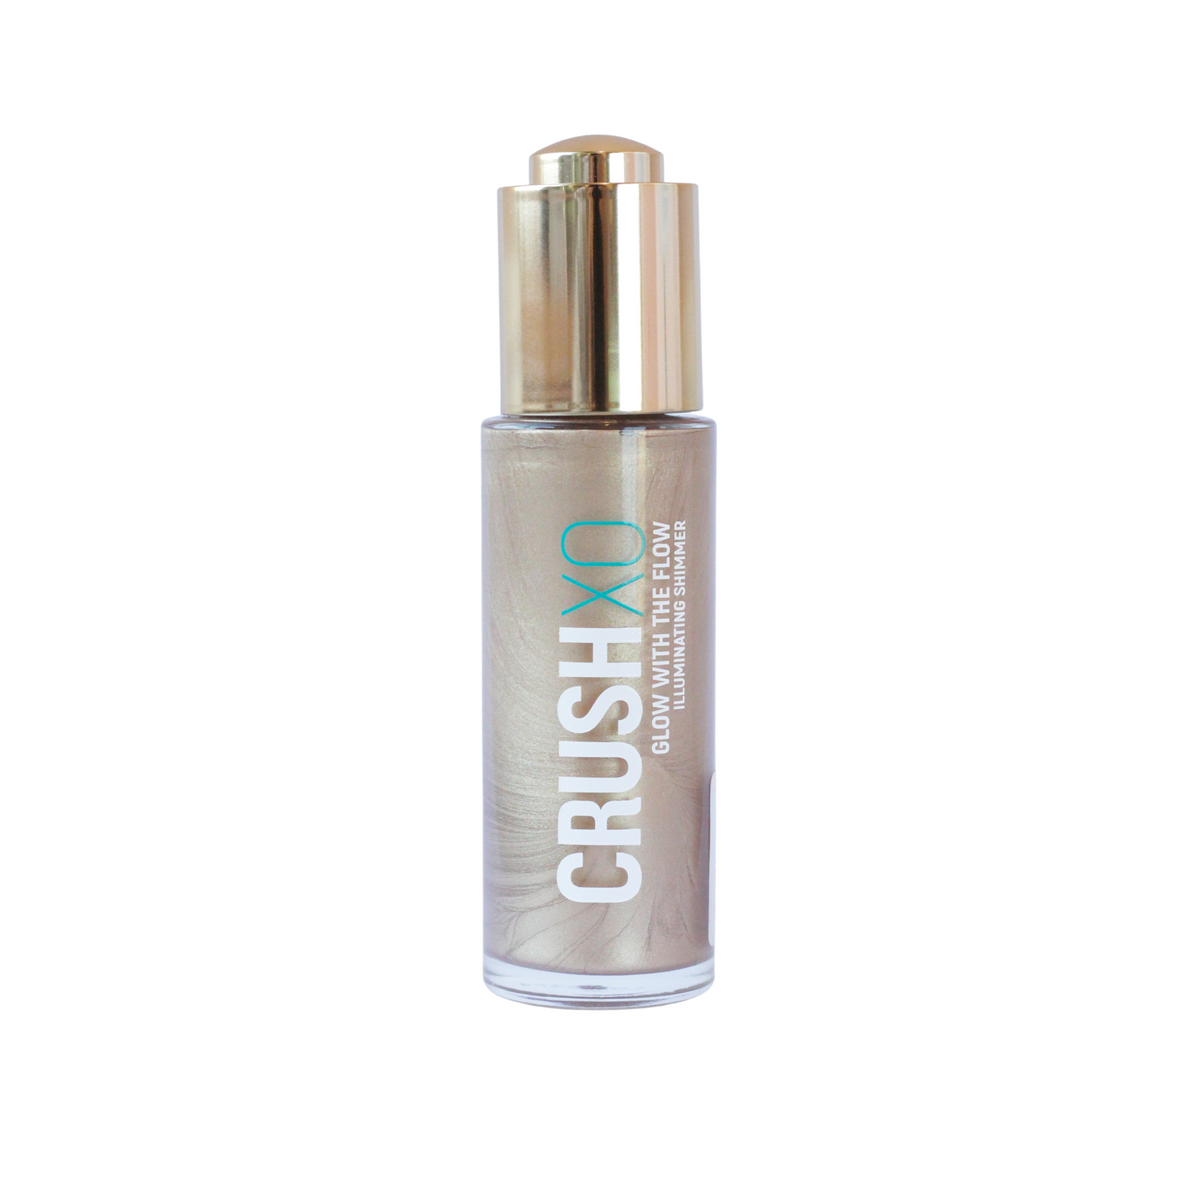 CRUSHXO GLOW WITH THE FLOW ILLUMINATING SHIMMER